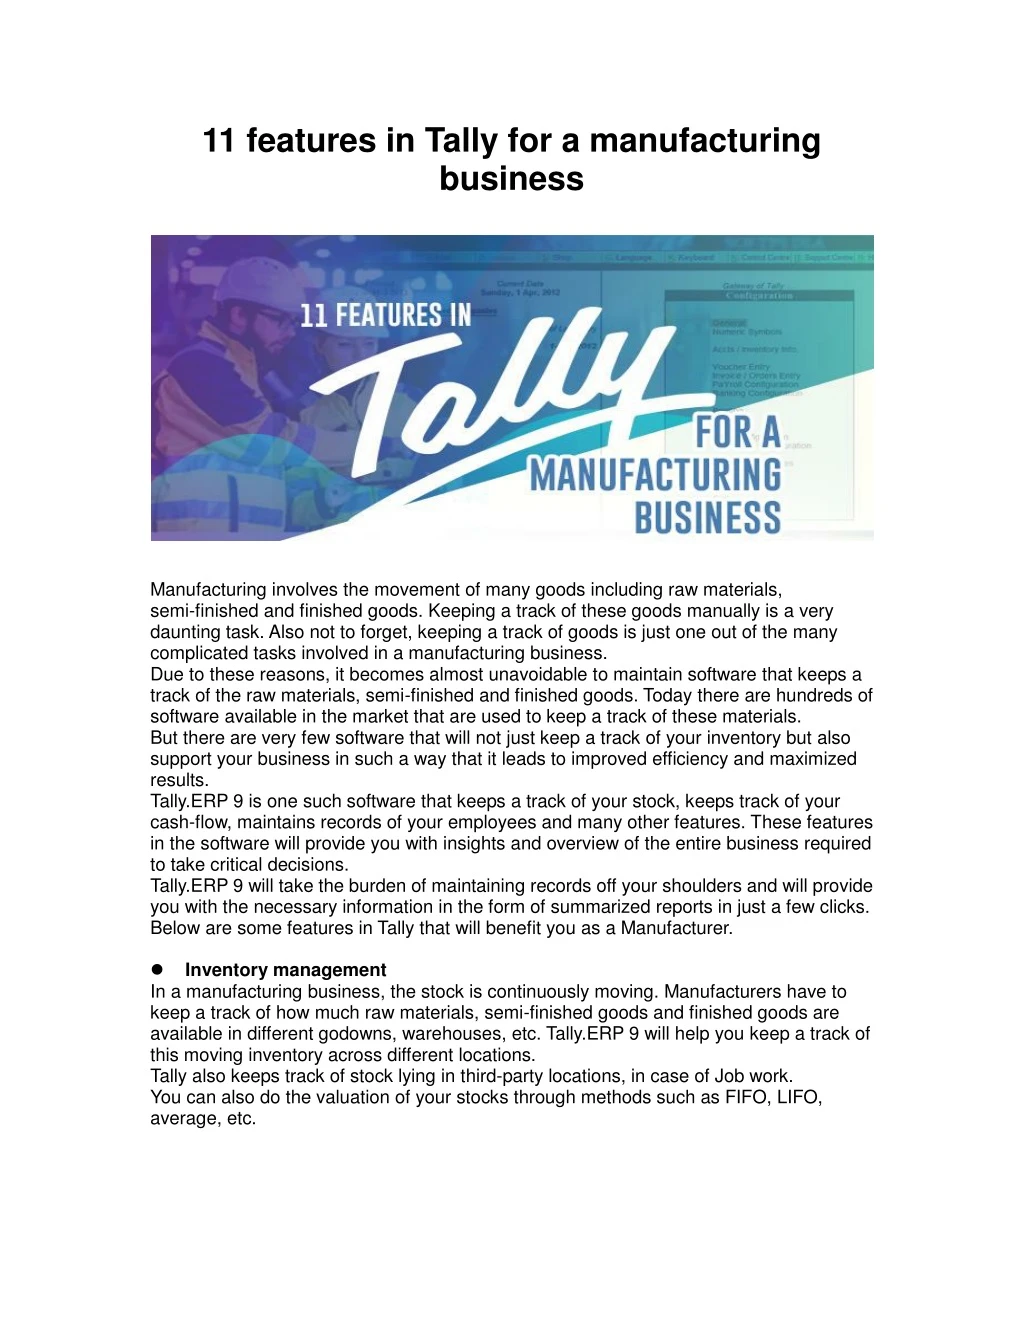 11 features in tally for a manufacturing business